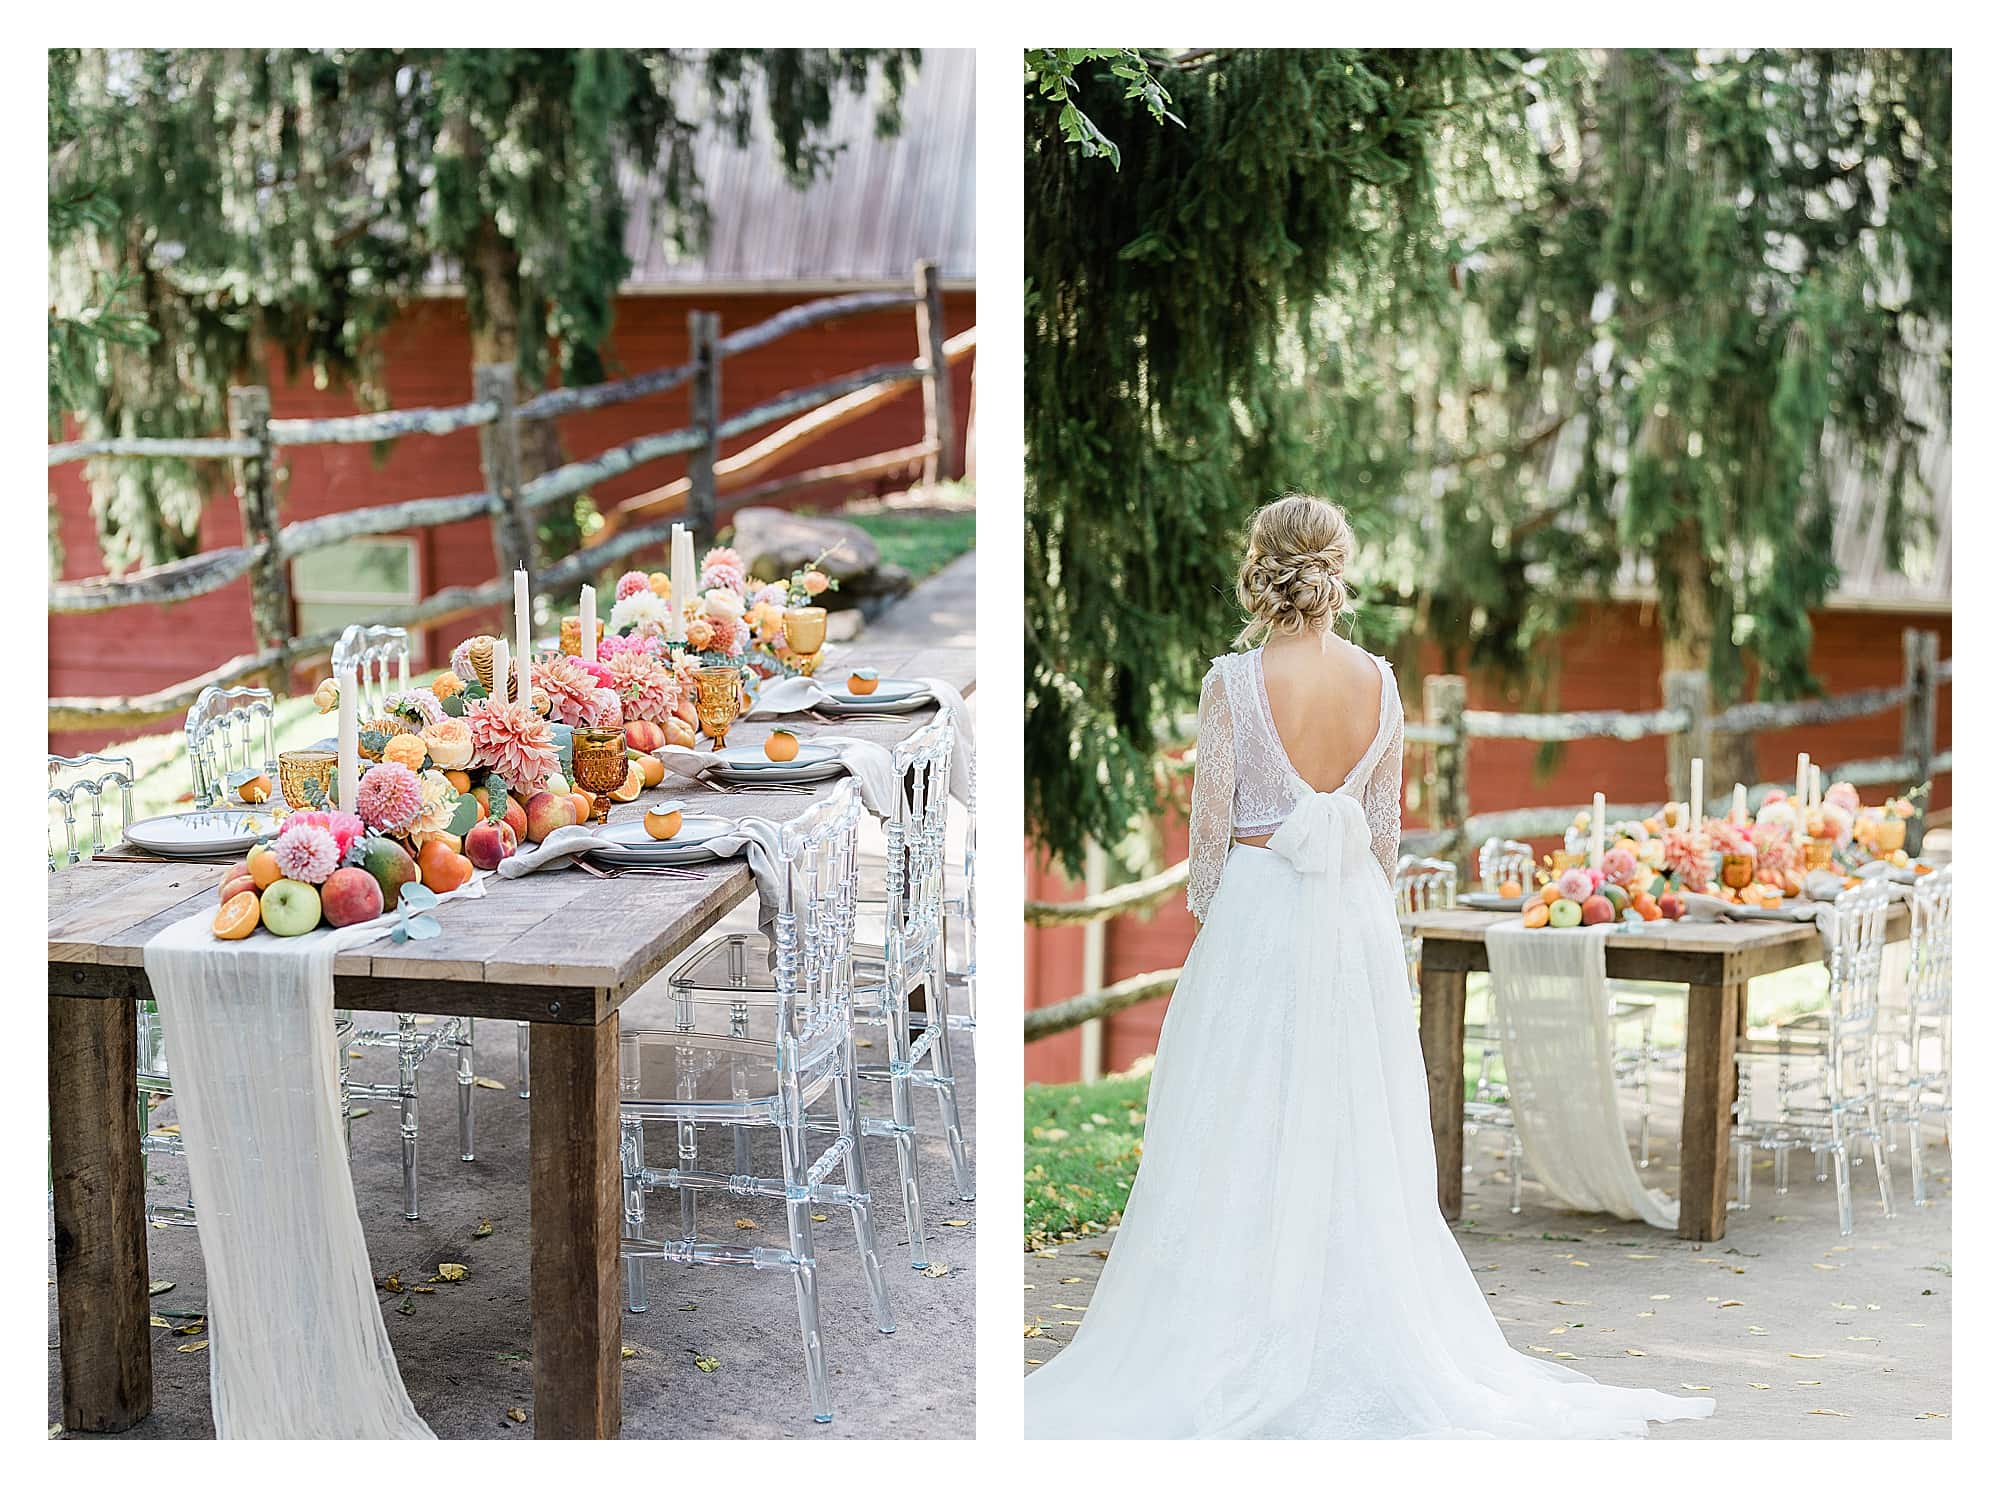 Rustic wooden table and clear plastic chairs with peach, pink and yellow citrus fruits as centrepiece down center of table with white candles with bride in white two piece lace gown standing beside smiling